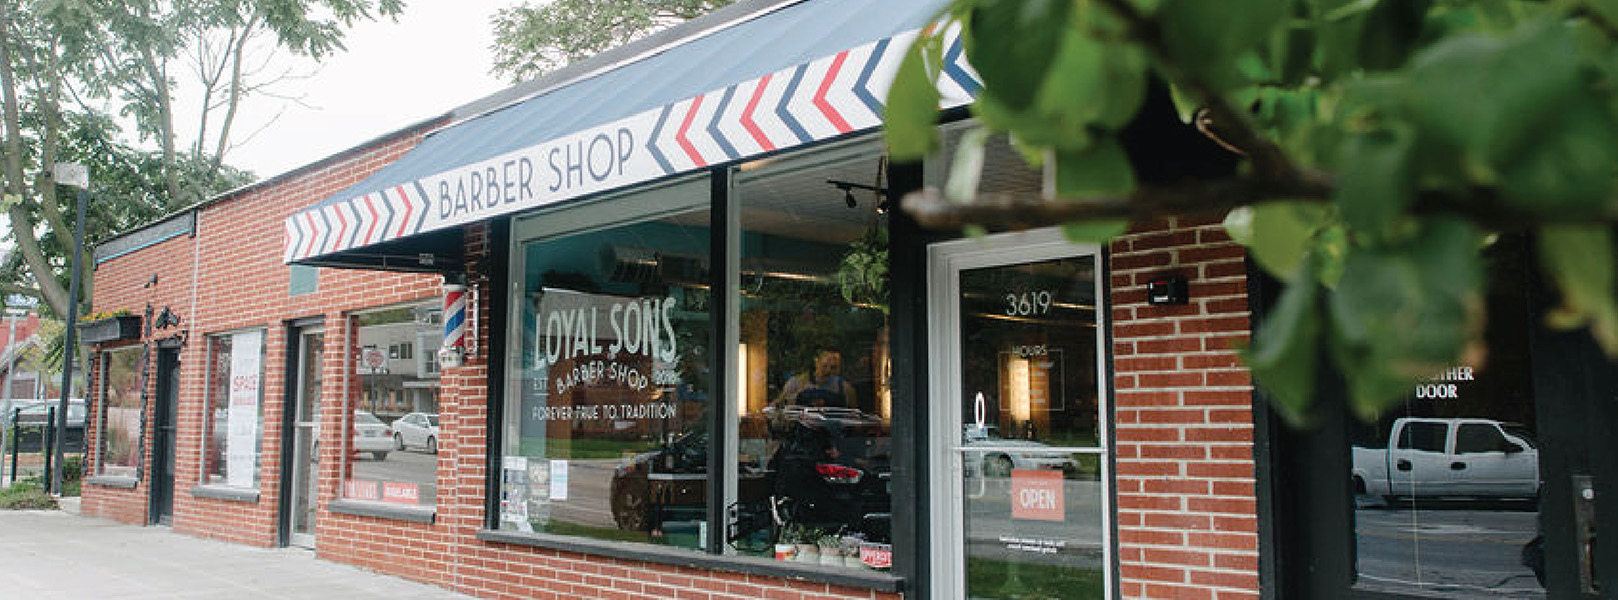 Brick exterior and navy awning of Loyal Sons Barber Shop in Des Moines, Iowa